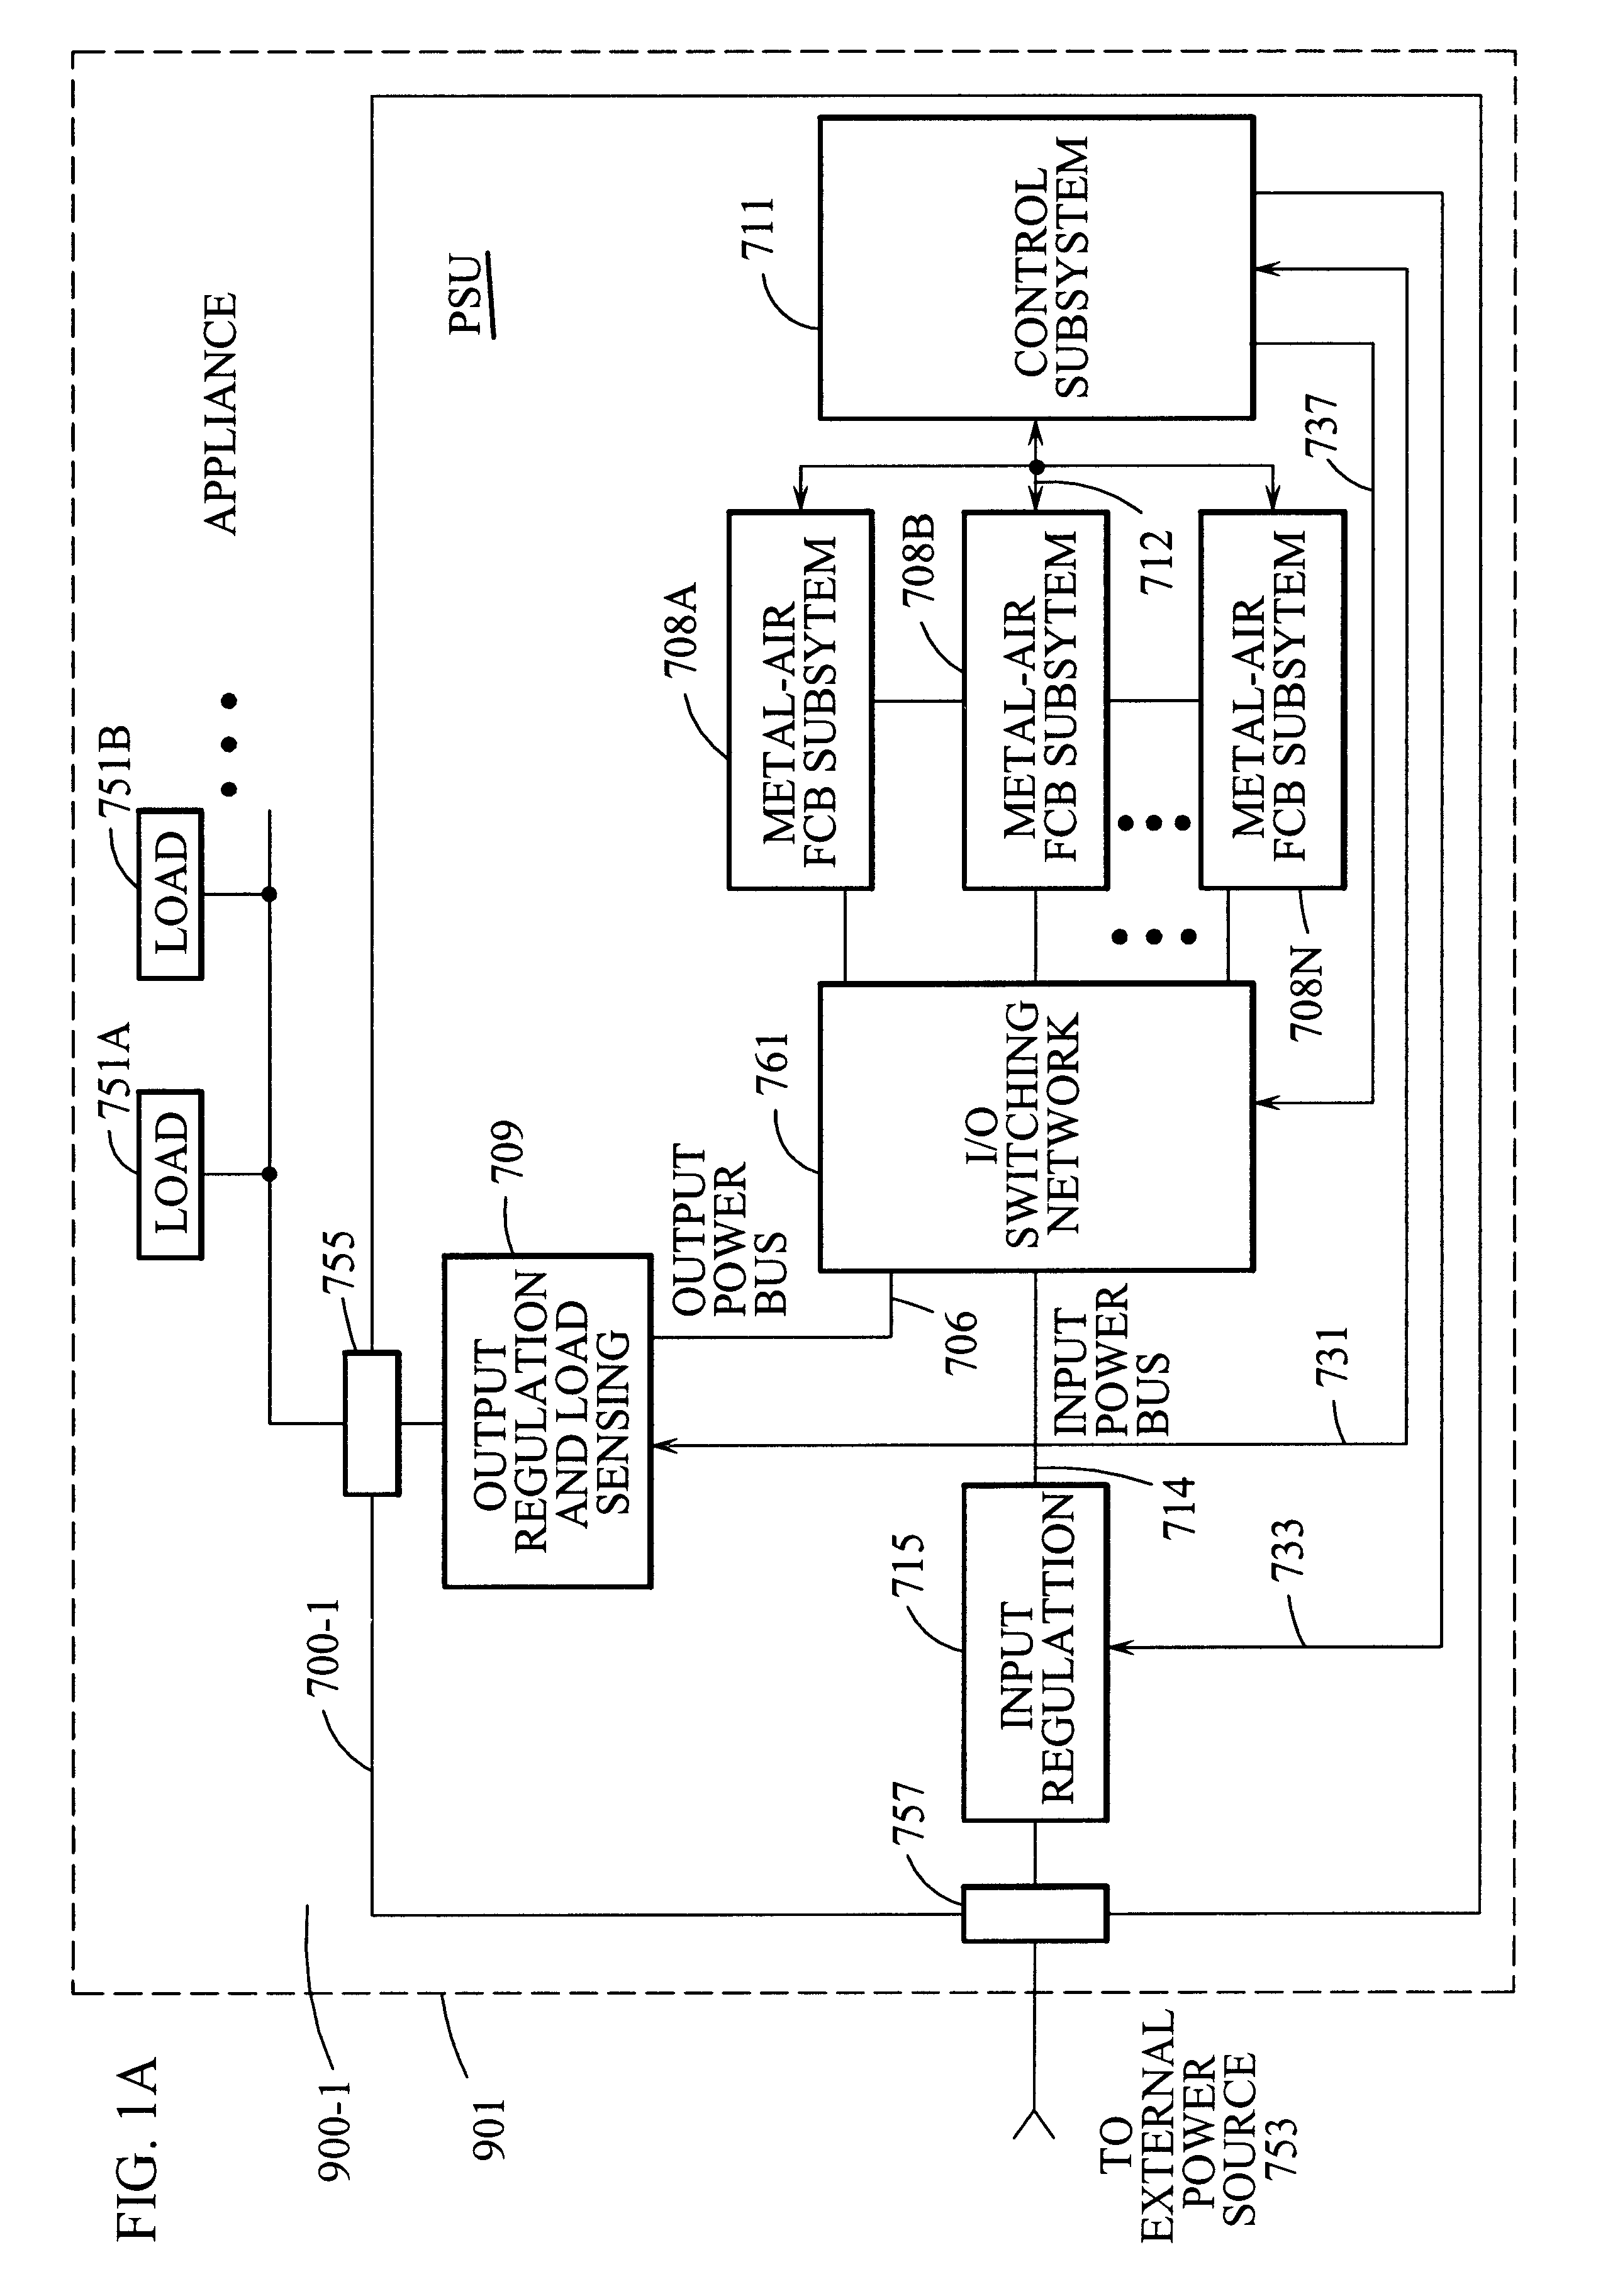 Appliance with refuelable and rechargeable metal-air fuel cell battery power supply unit integrated therein